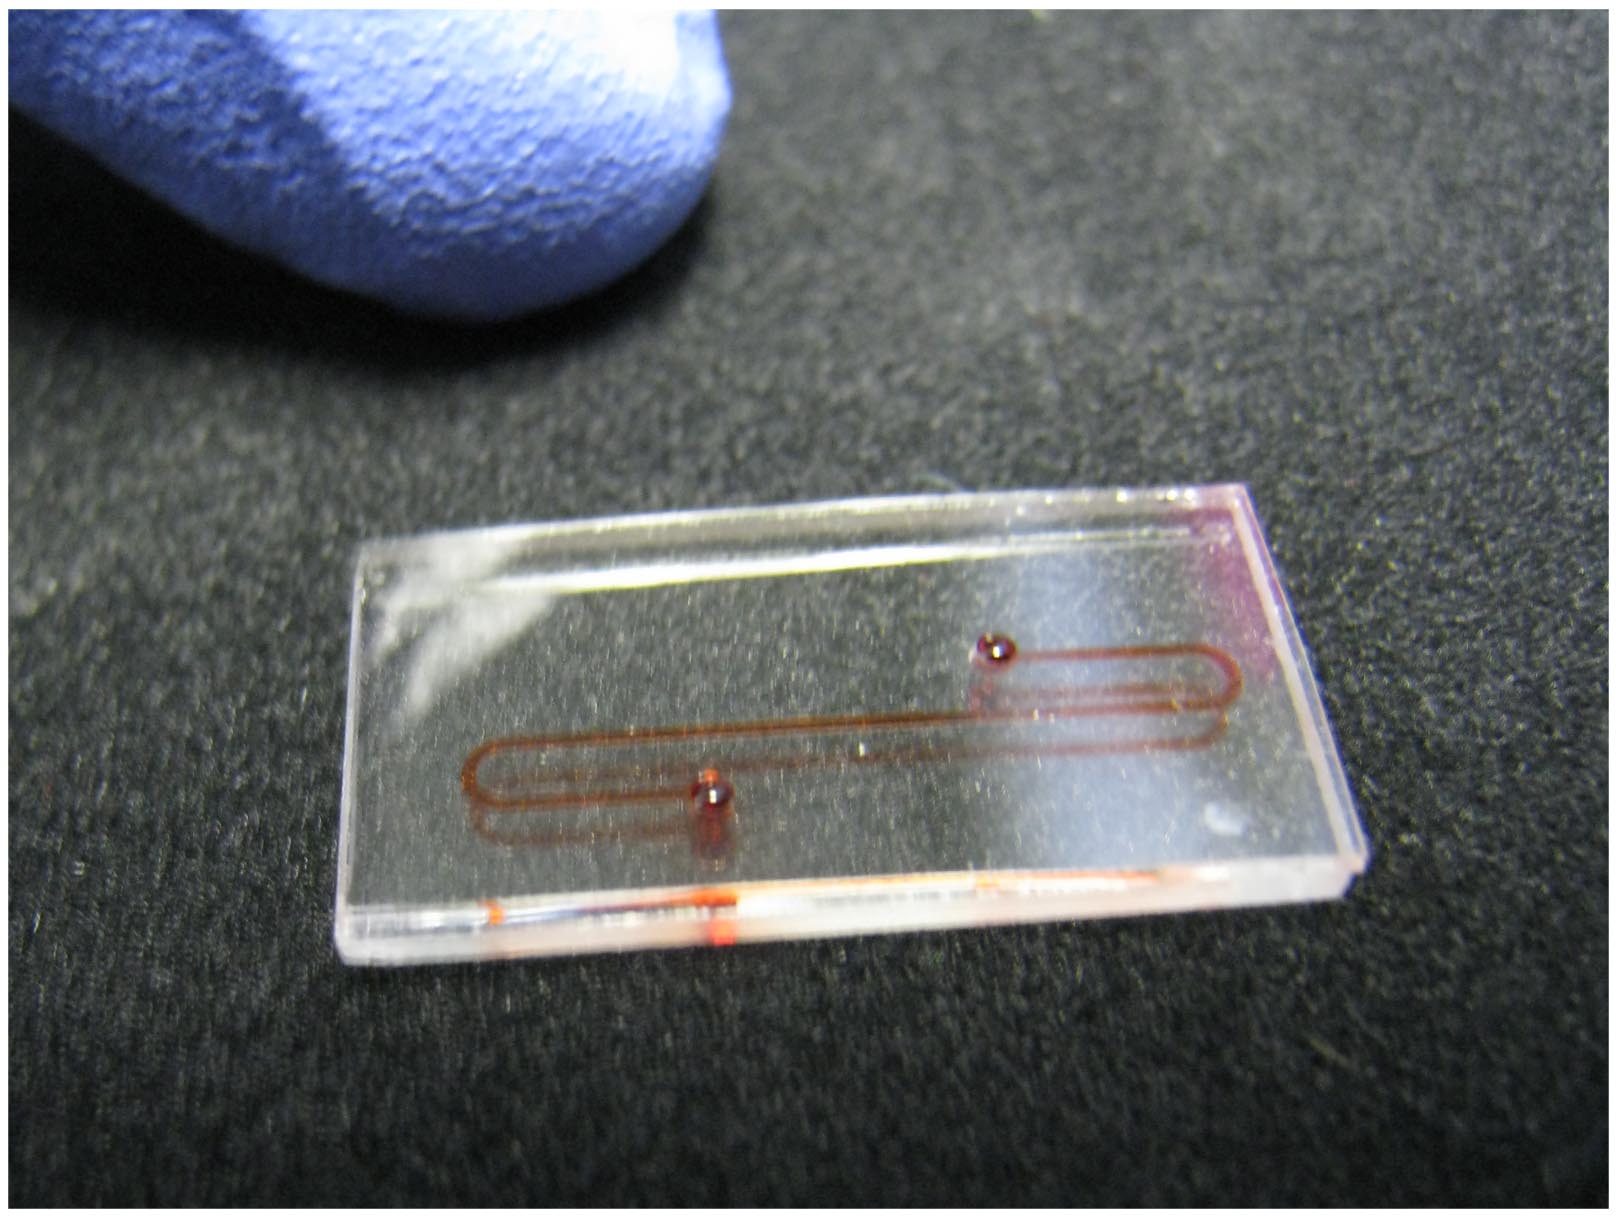 blood in microfluidic channel